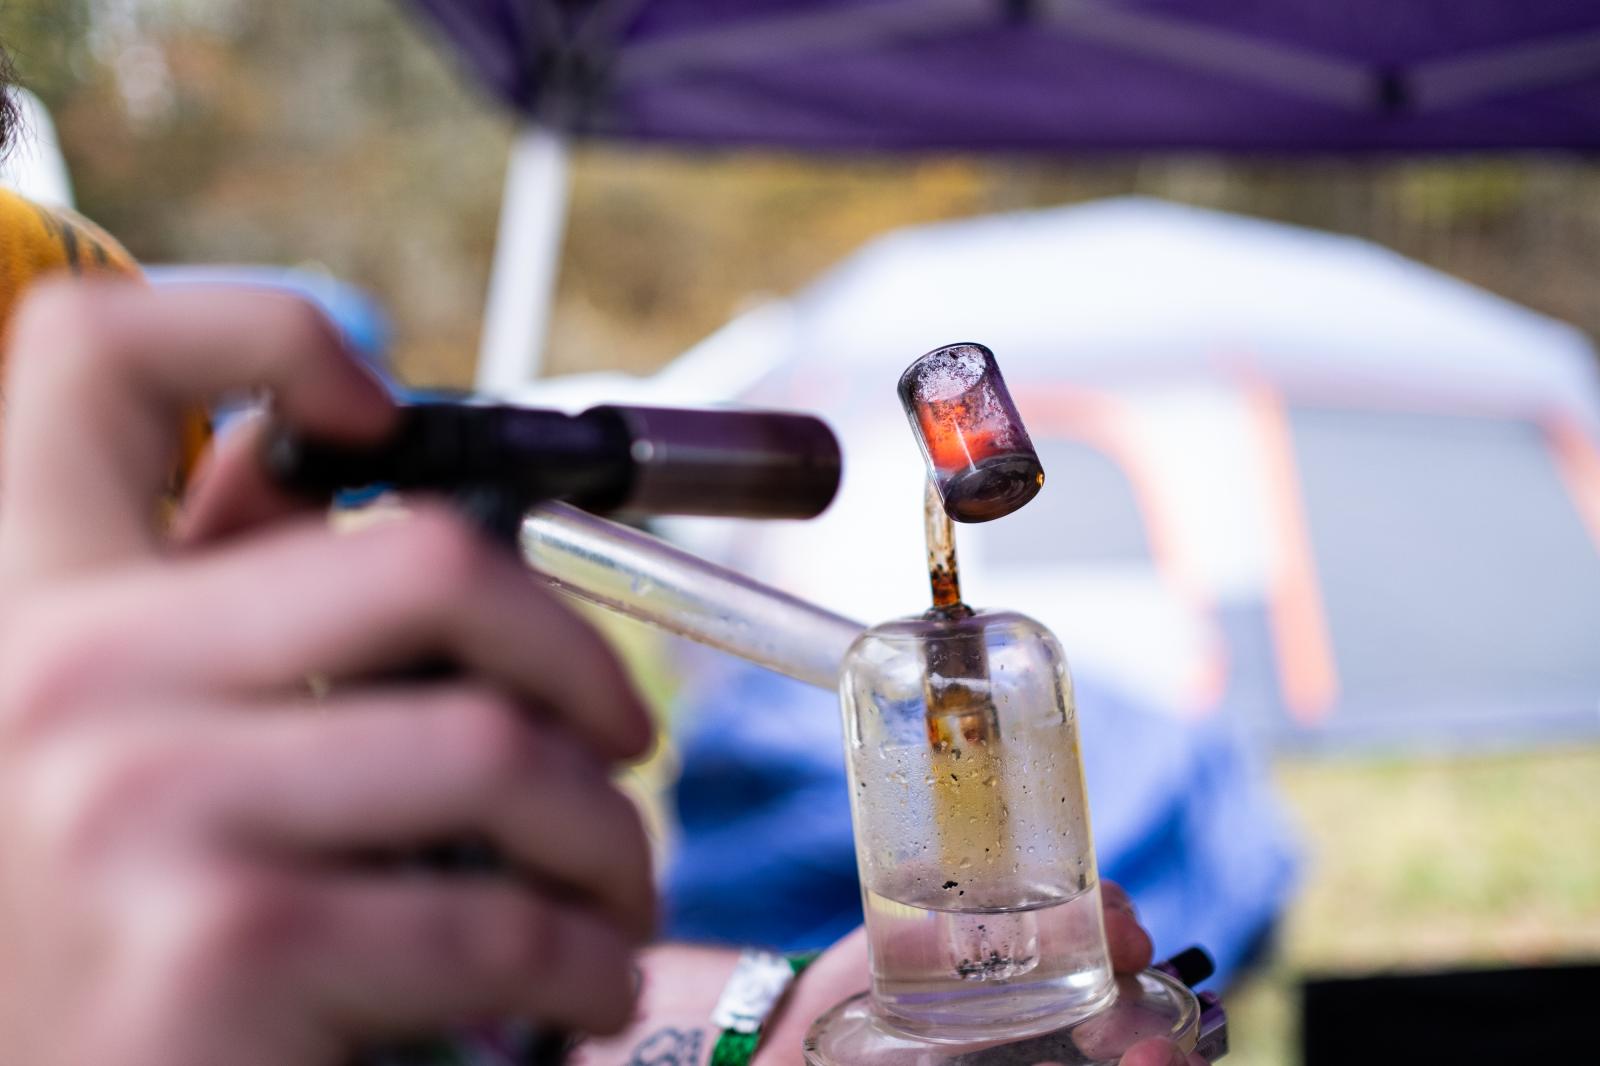 Image from CNY Hemp Festival - A vendor at the Hemp Festival cleans a dab rig used for...